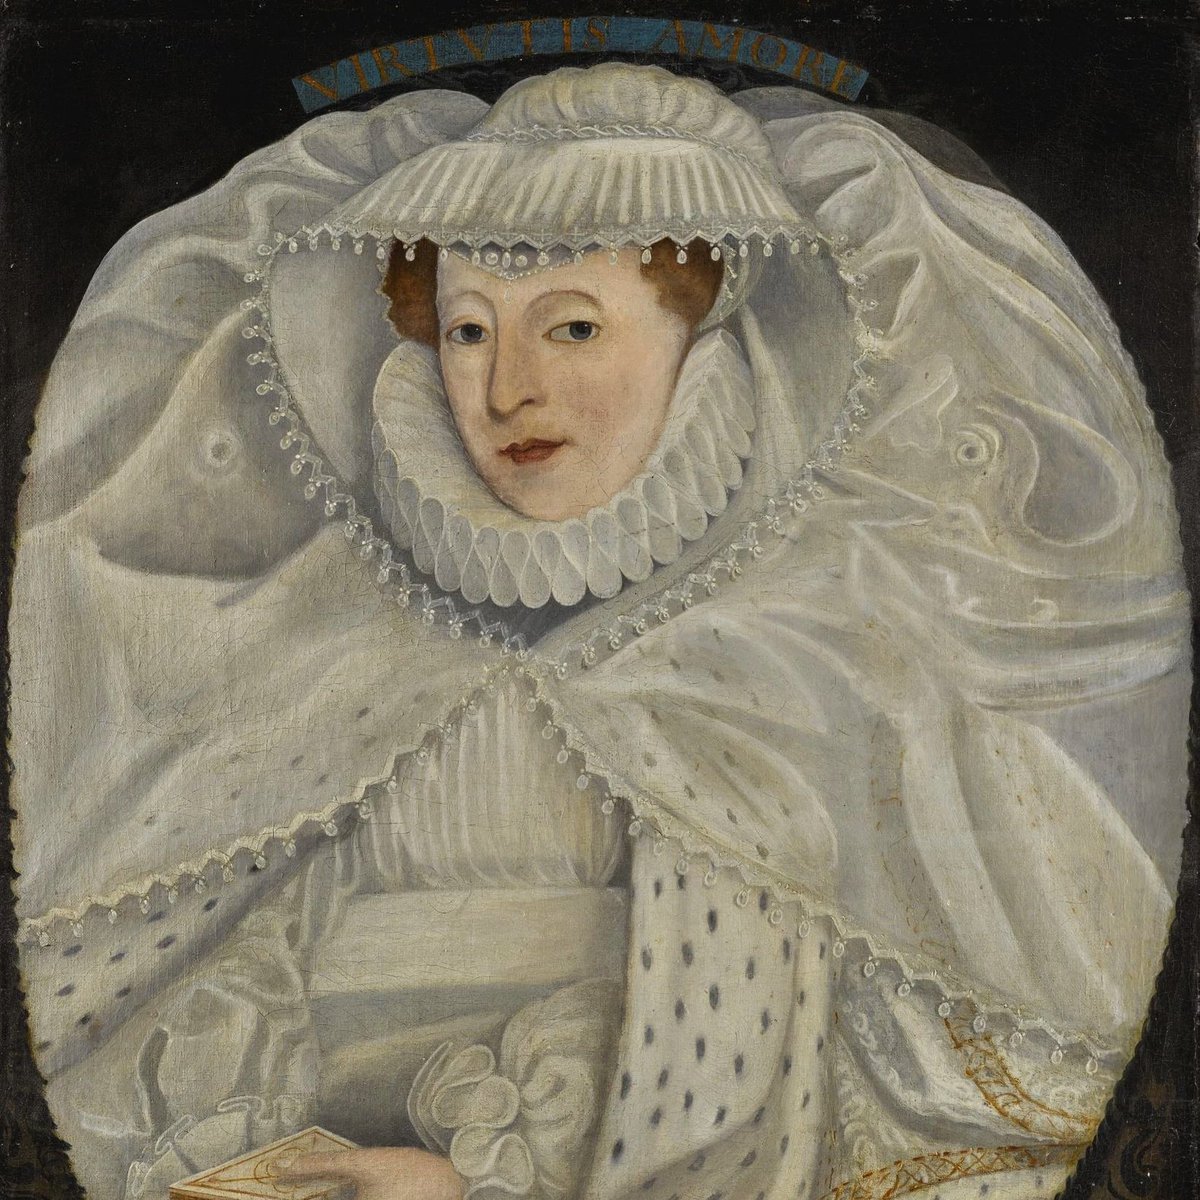 Two rare portraits of #MaryQueenofScots after Nicholas Hilliard. These portraits were likely based on originals painted in Mary's lifetime. The identification of the second portrait is contested due to its striking resemblance to Queen Elizabeth I.